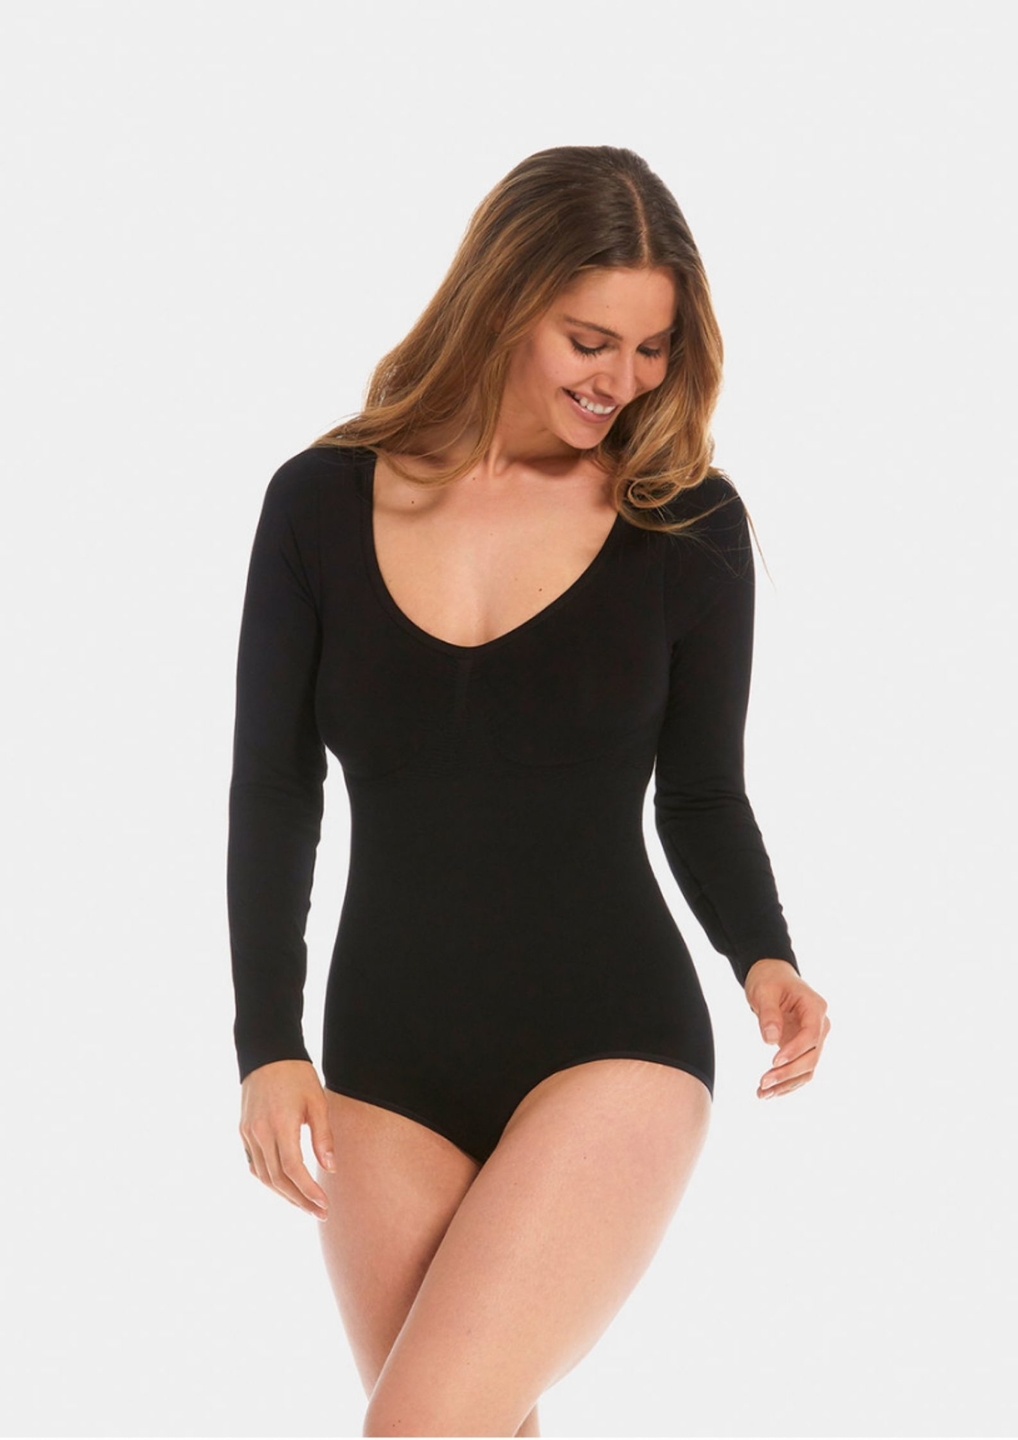 I'm 235 lbs with 42H boobs - I don't wear shapewear with tight